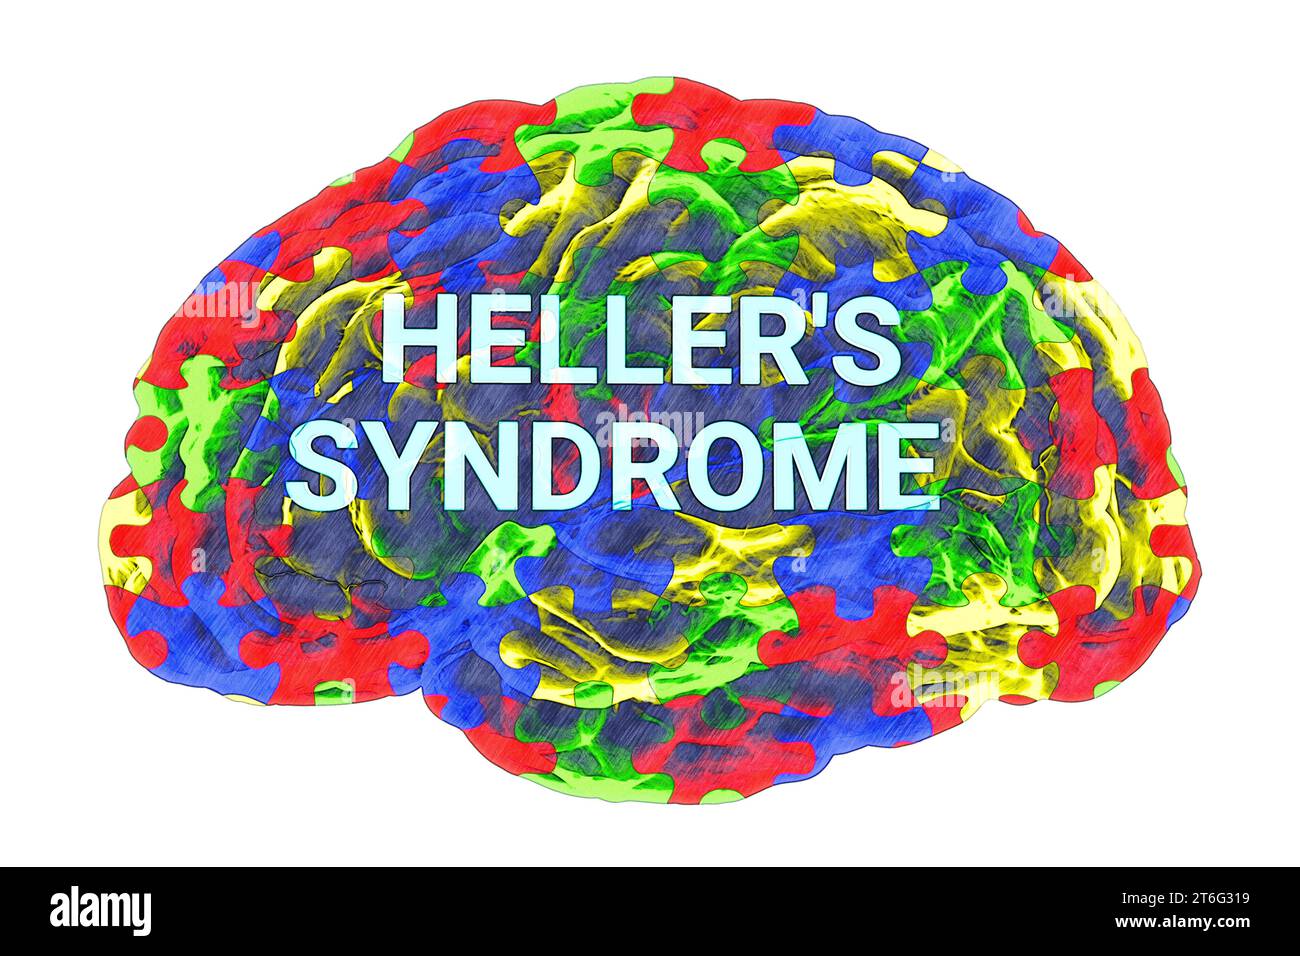 Text Heller's syndrome inside the model of a human brain, with a colorful puzzle pattern on its surface, emphasizing the neurological basis and the di Stock Photo